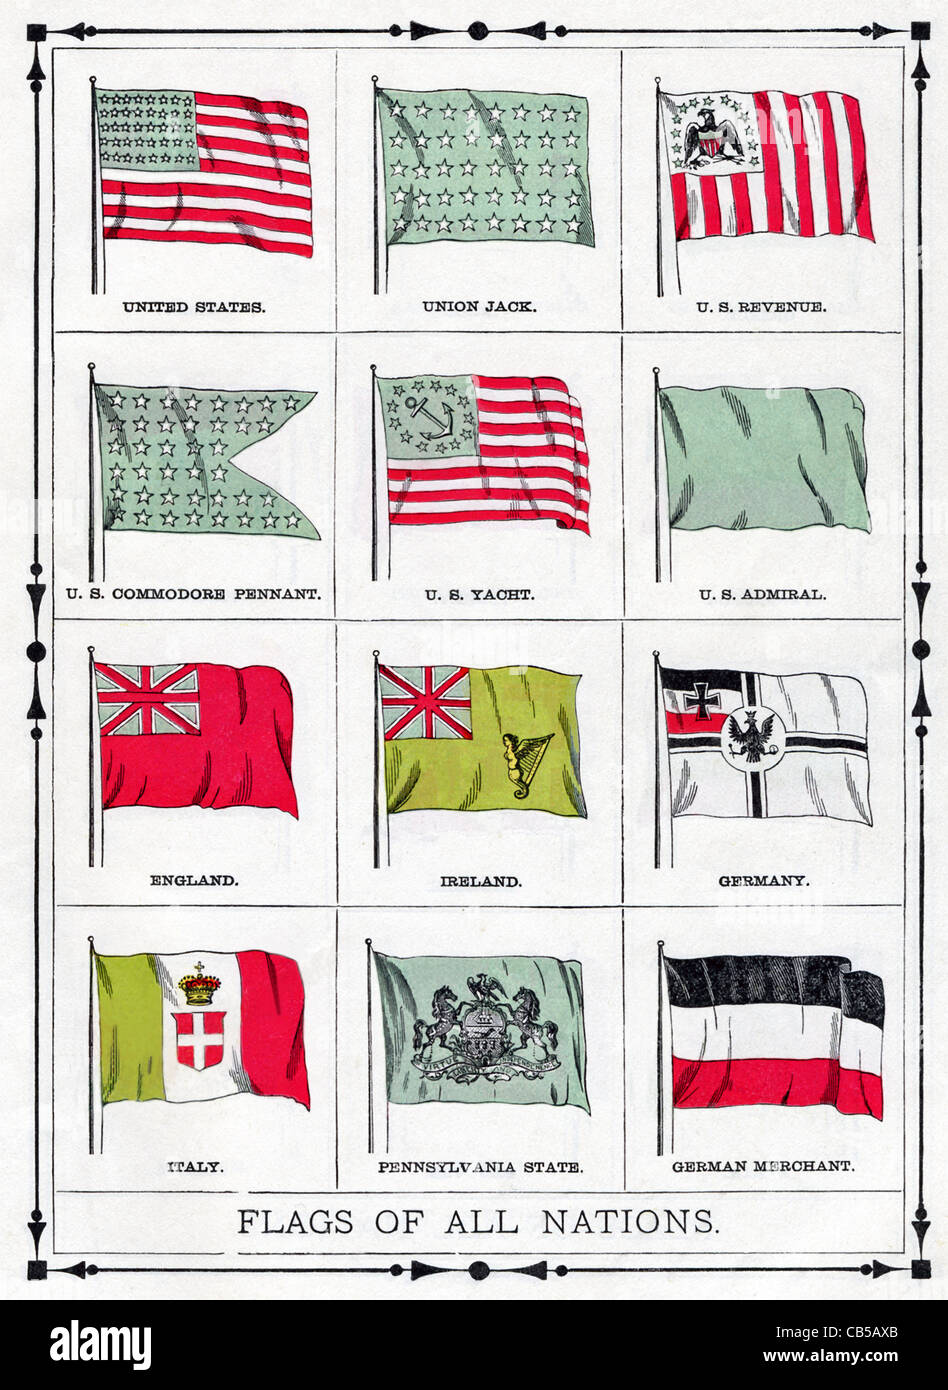 The flags shown in this illustration were current in 1896. They include United States, England, Ireland, Germany, and Italy. Stock Photo